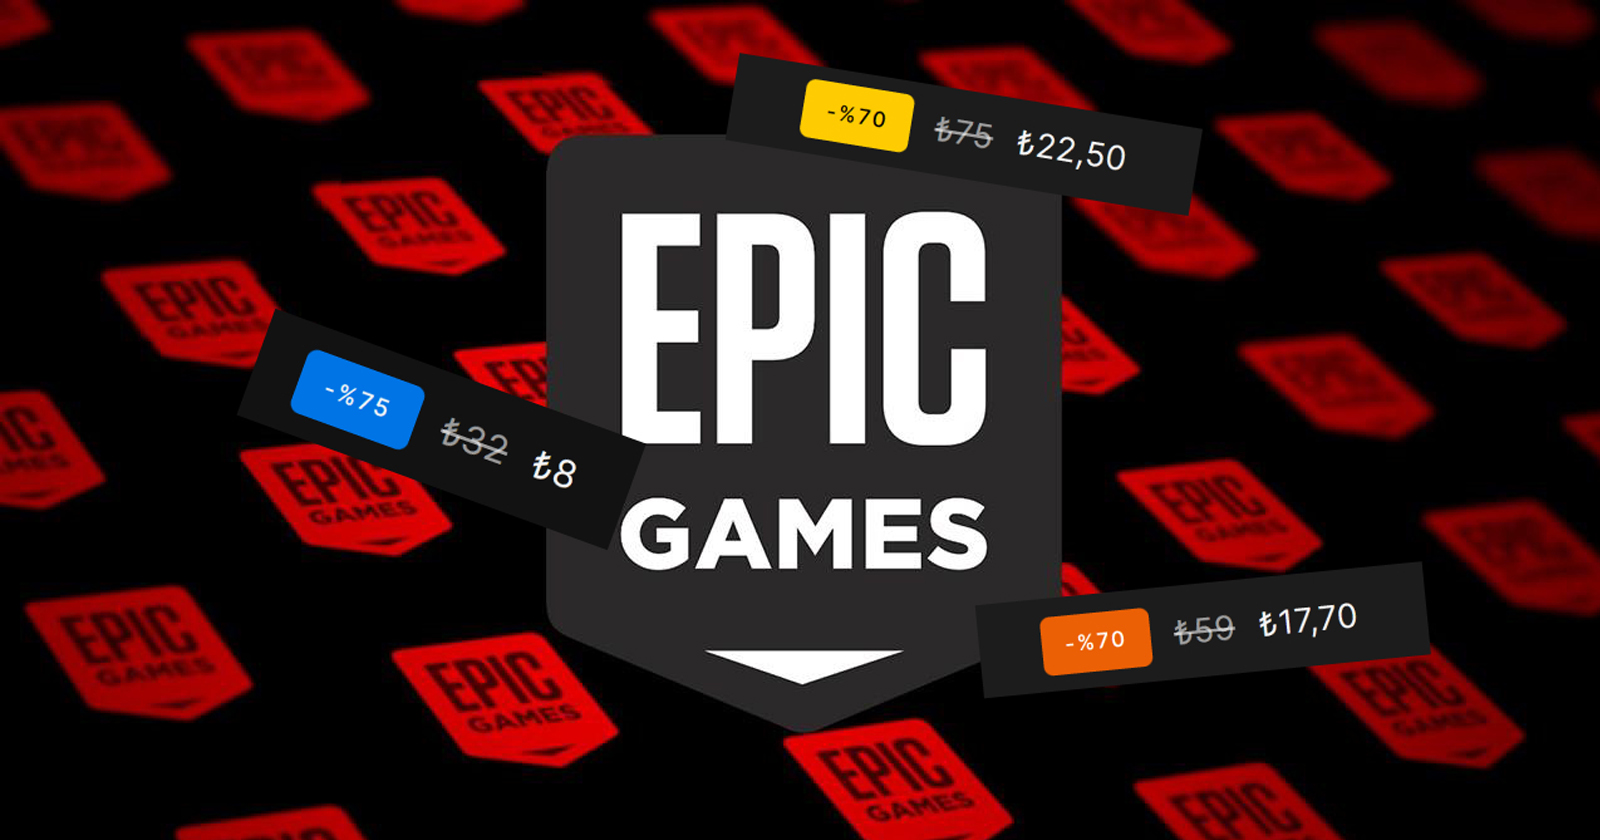 The game, which was sold for $20 on Steam, dropped to $0.2 on Epic Games!